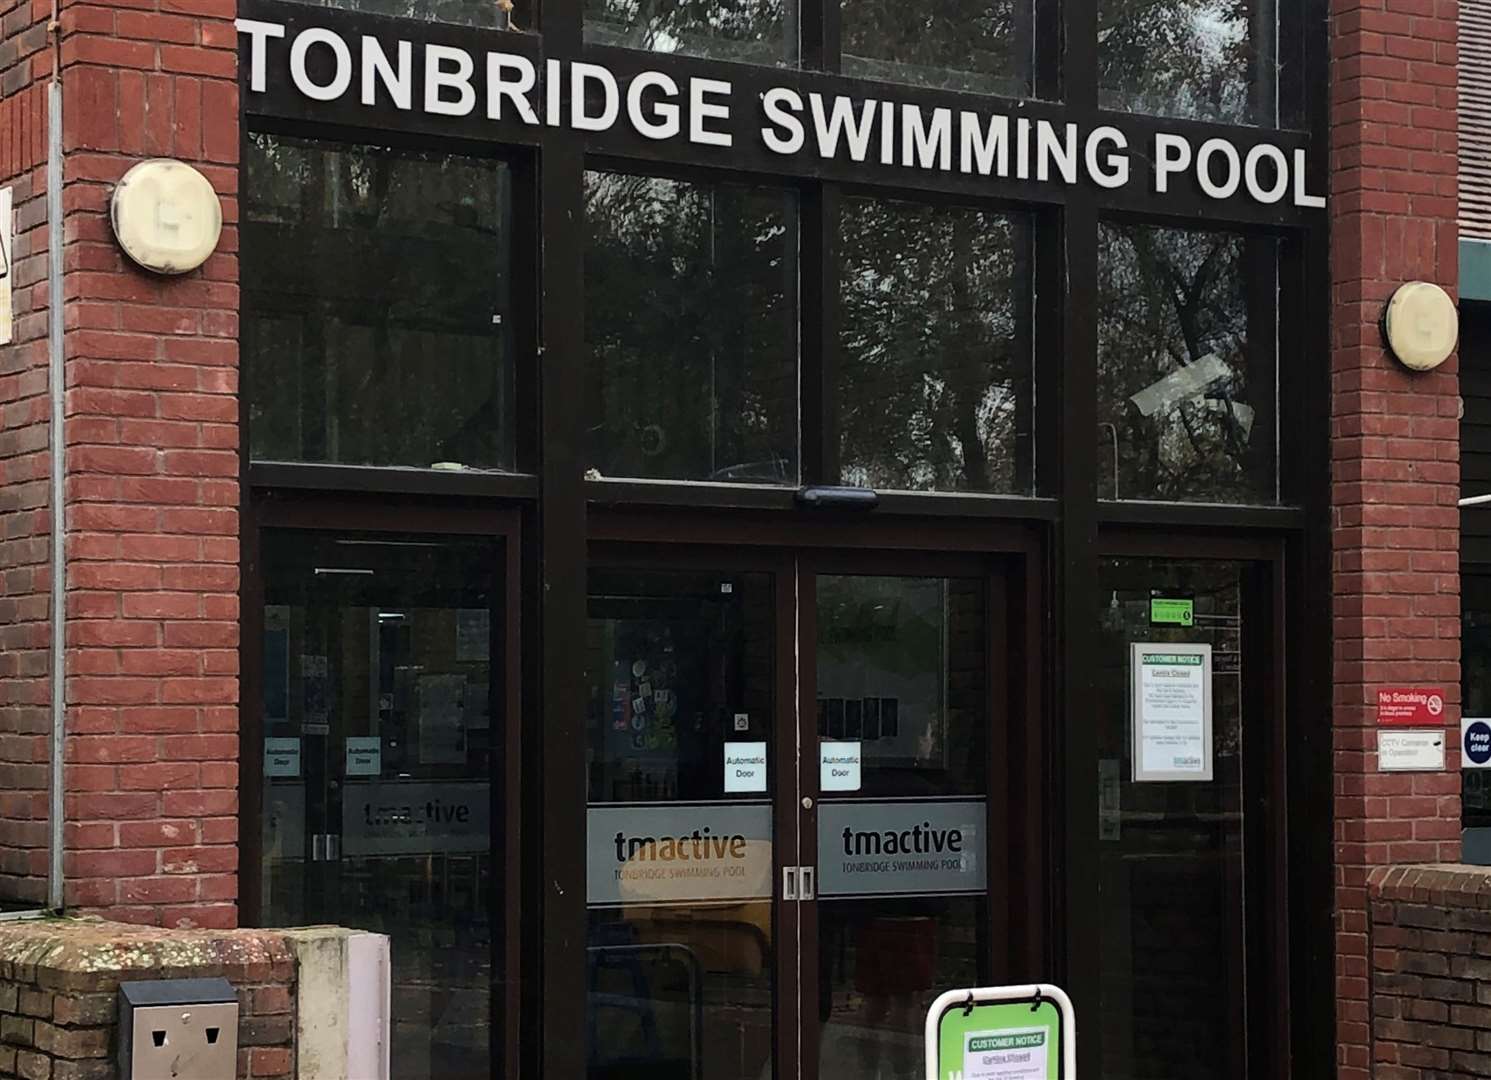 Tonbridge Swimming Pool is being equipped with solar panels